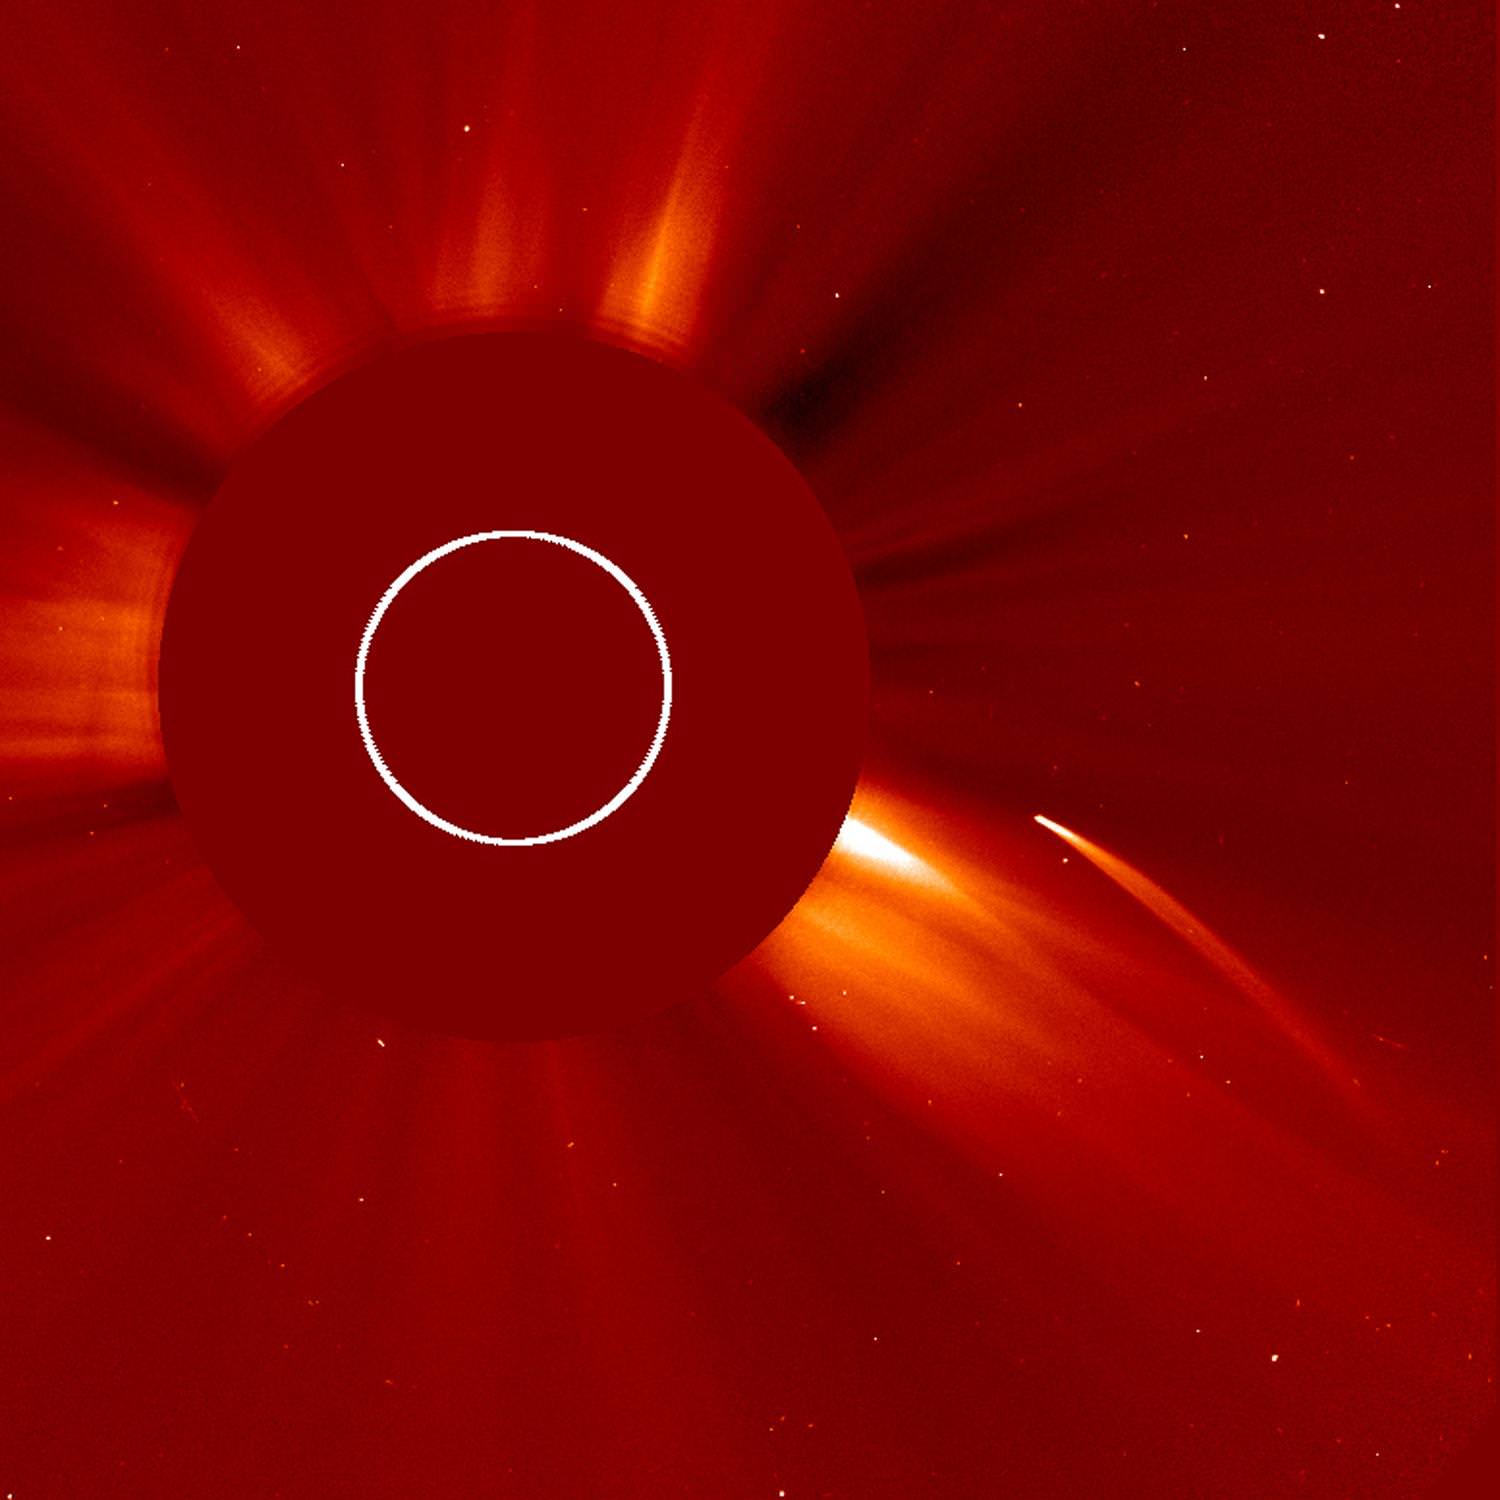 The Sun is Slowly Tearing This Comet Apart